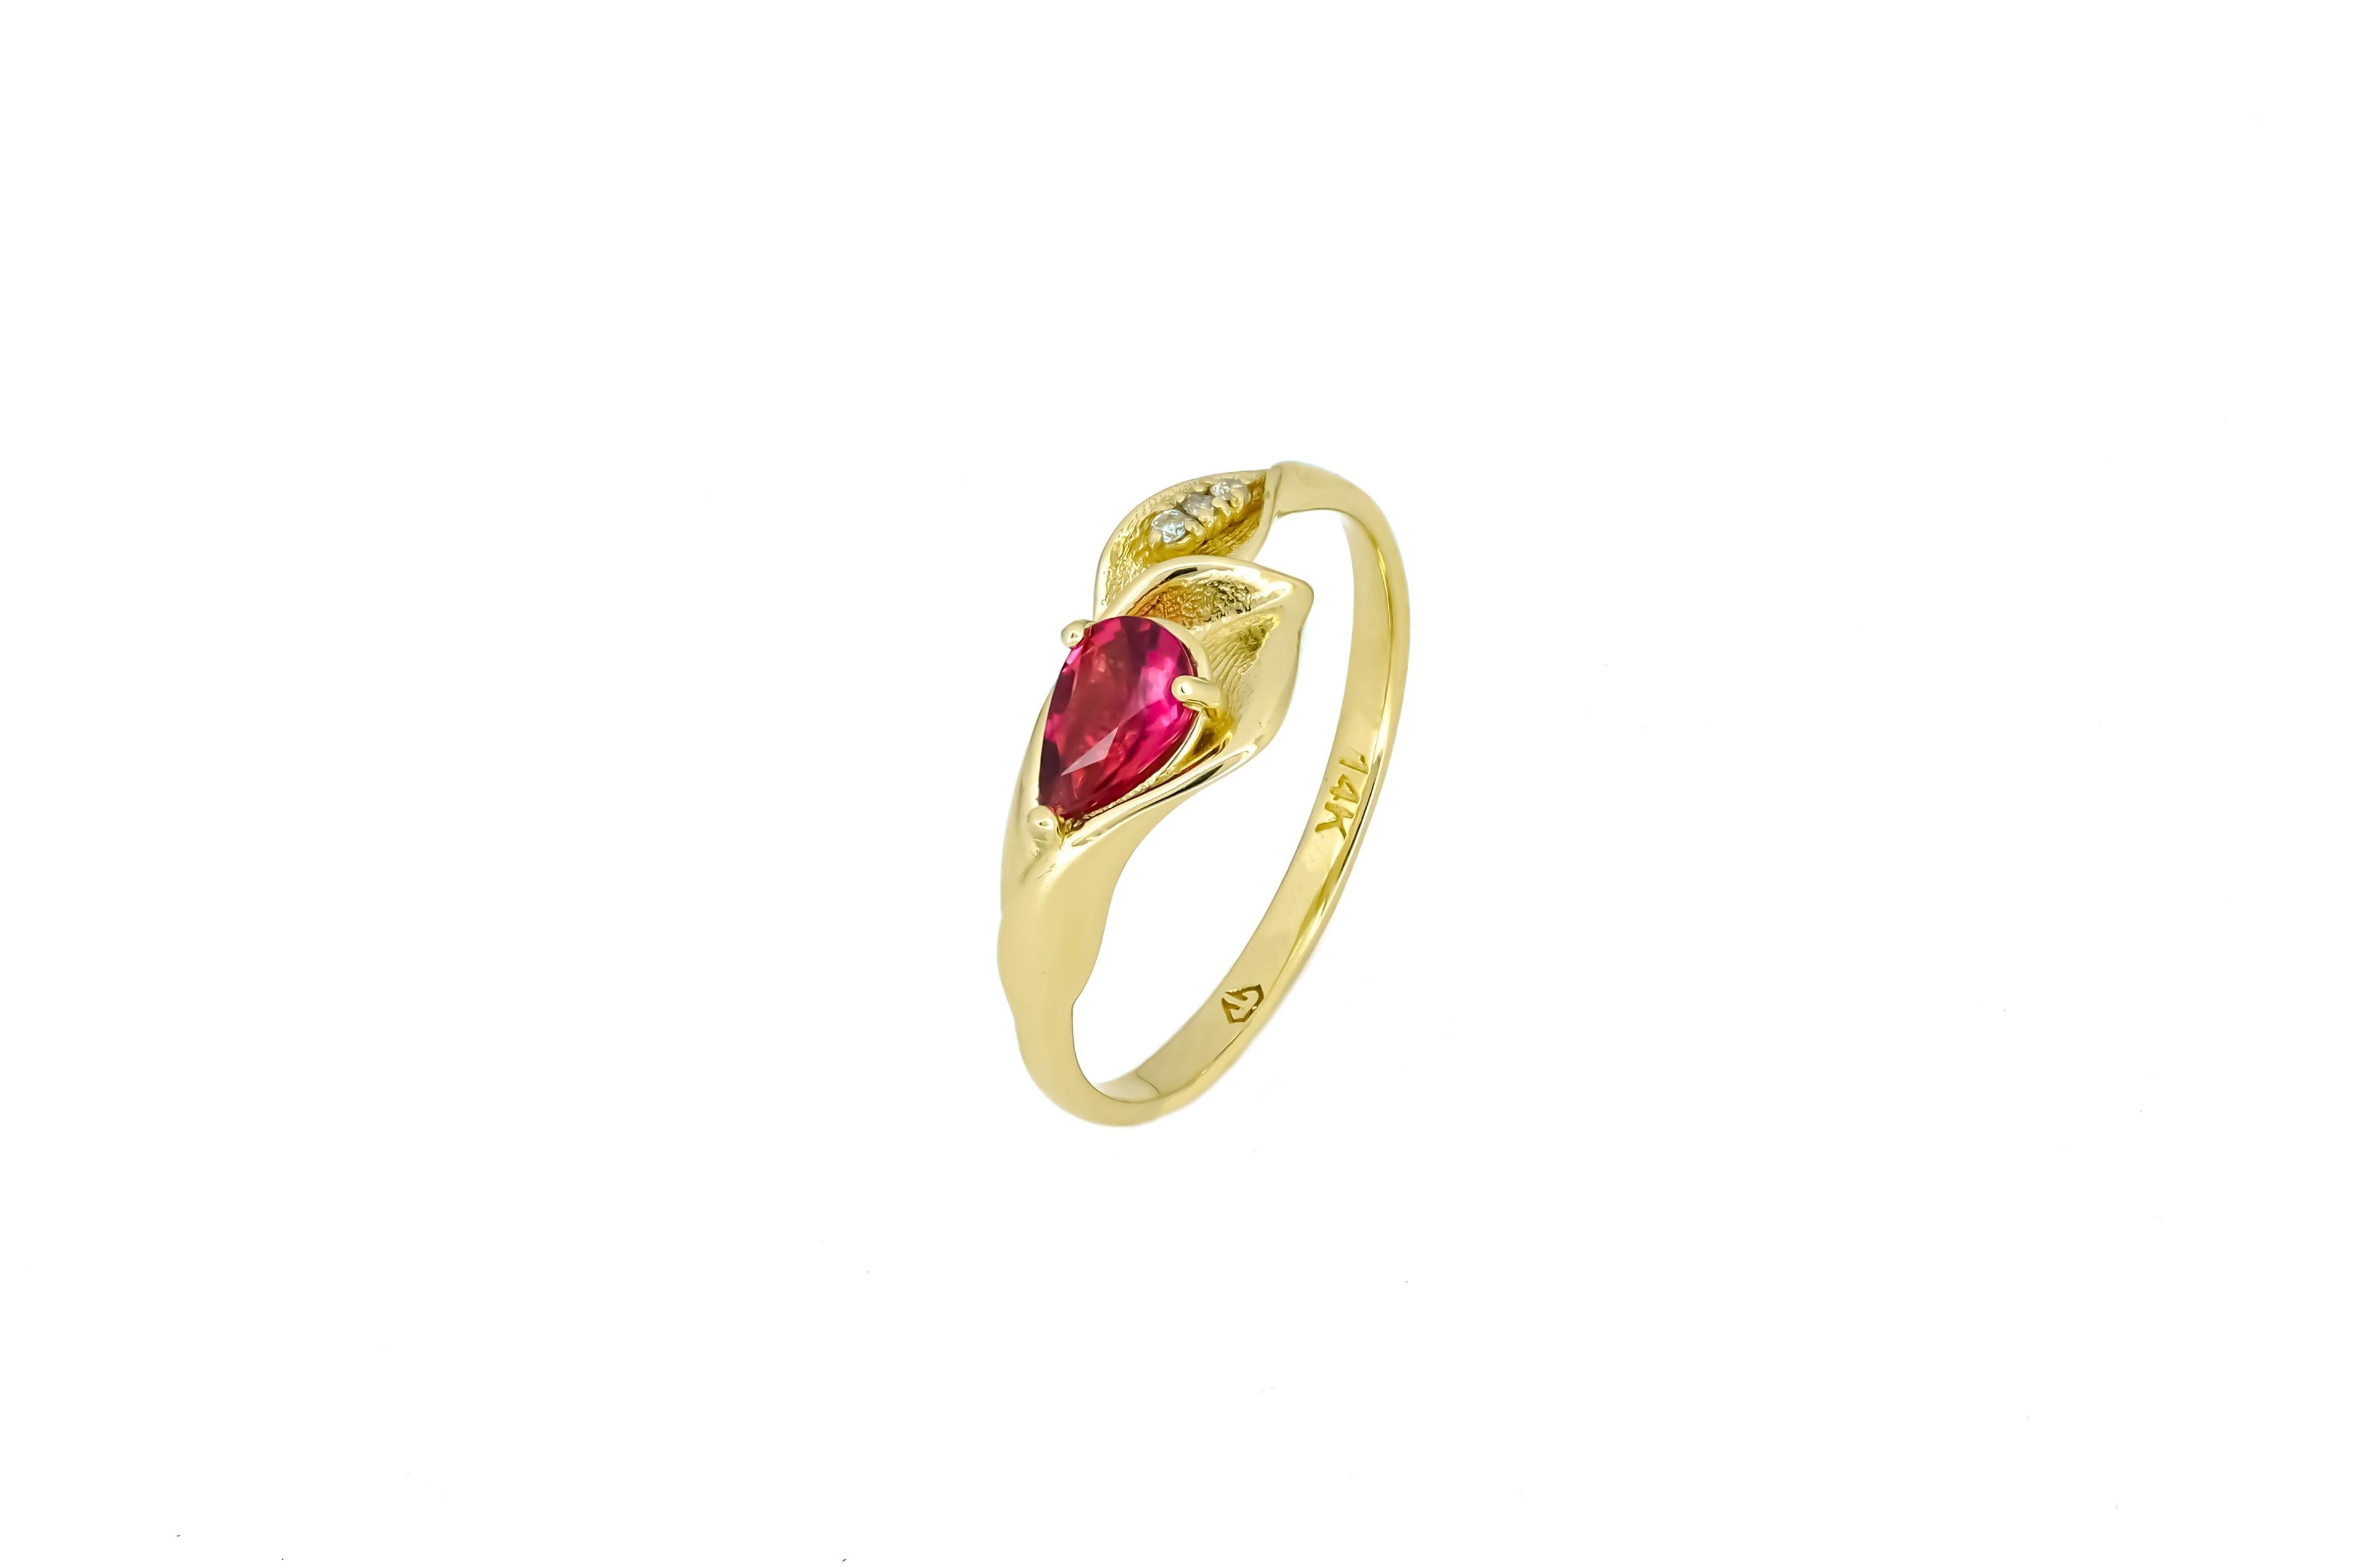 Lily Calla Gold Ring, 14 Karat Gold Ring with Garnet and Diamonds 5